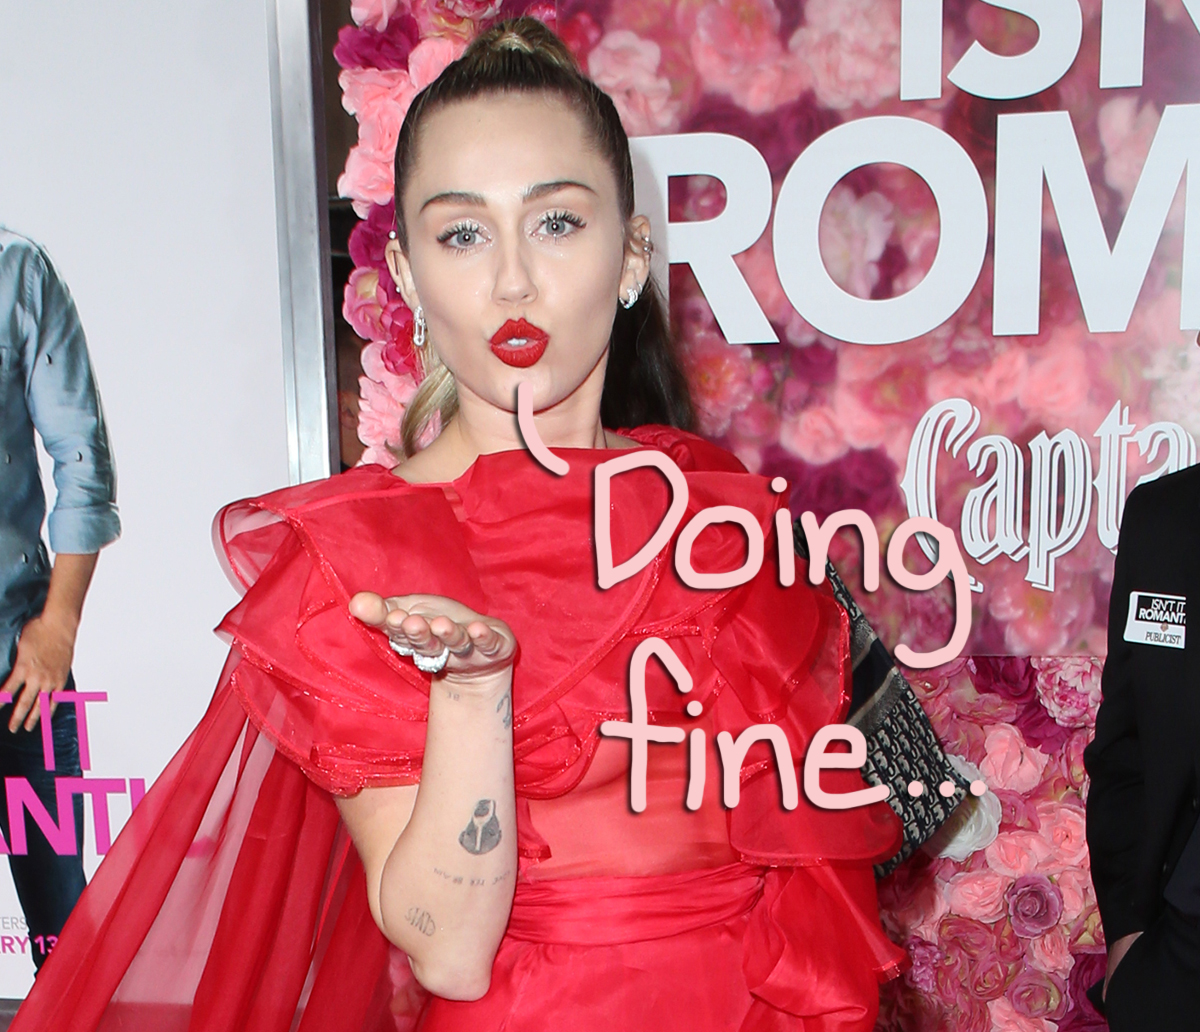 Miley Cyrus Makes First Statement Since Liam Hemsworth Split News Brody Jenner Weighs In Too